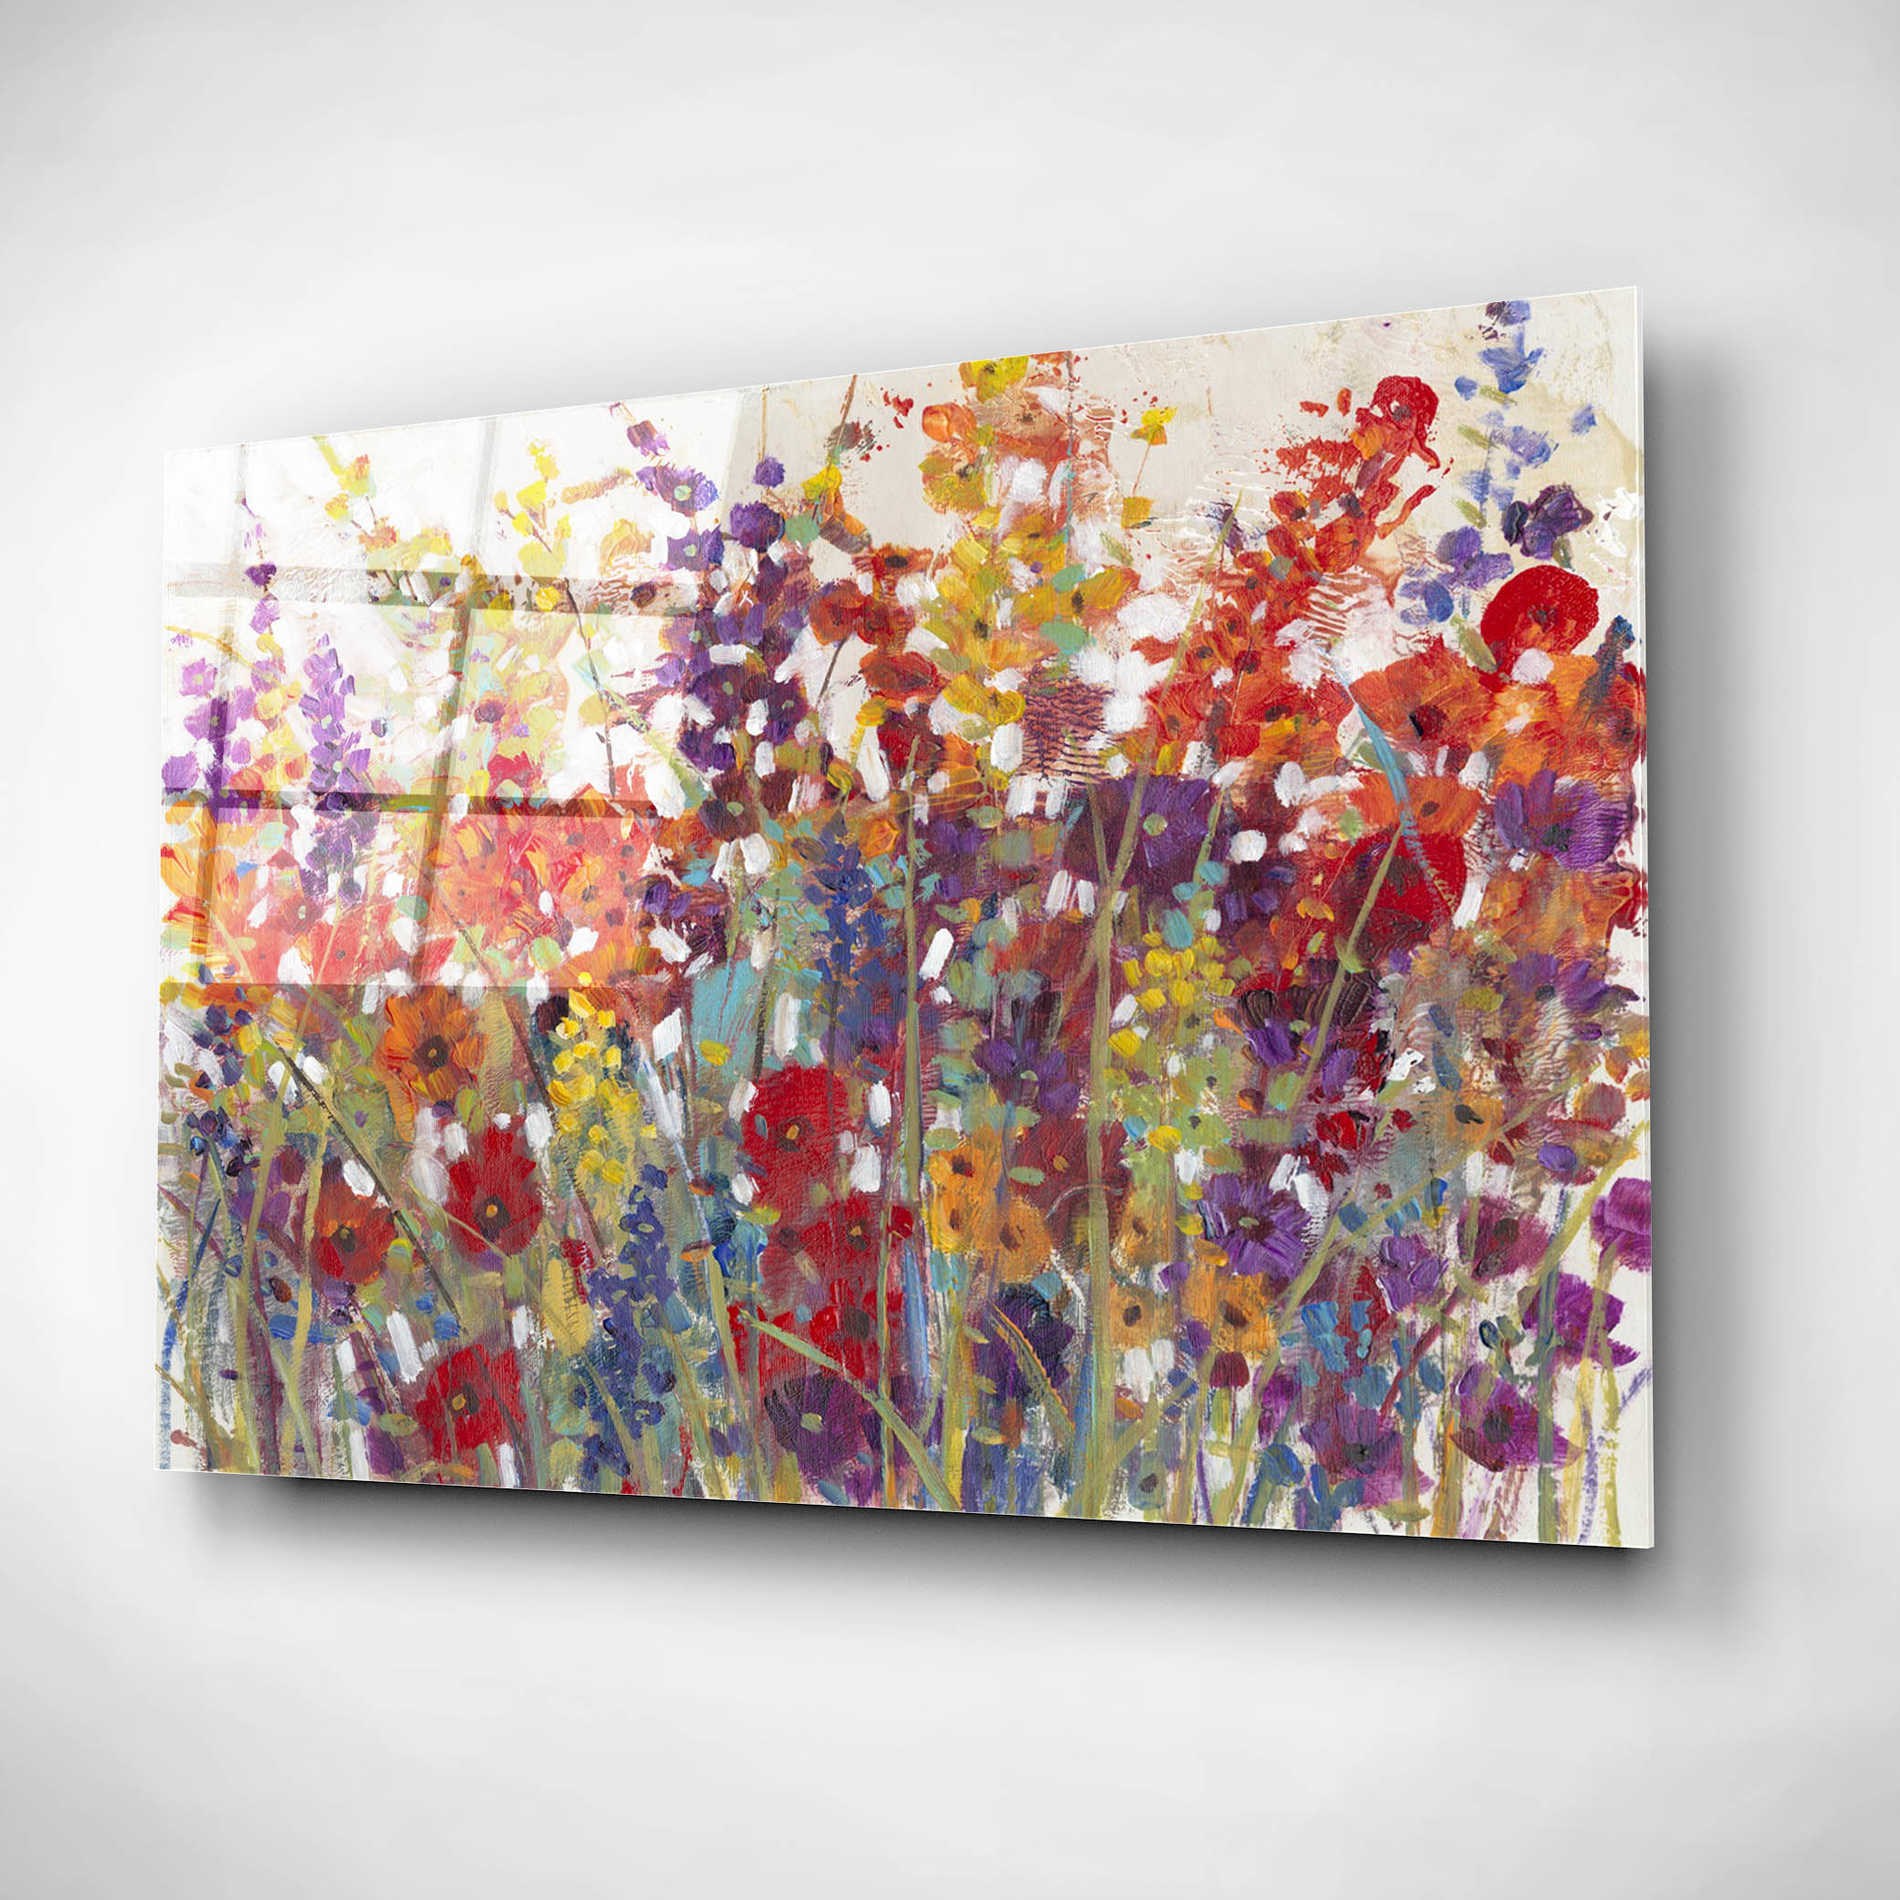 Epic Art 'Variety of Flowers II' by Tim O'Toole, Acrylic Glass Wall Art,24x16